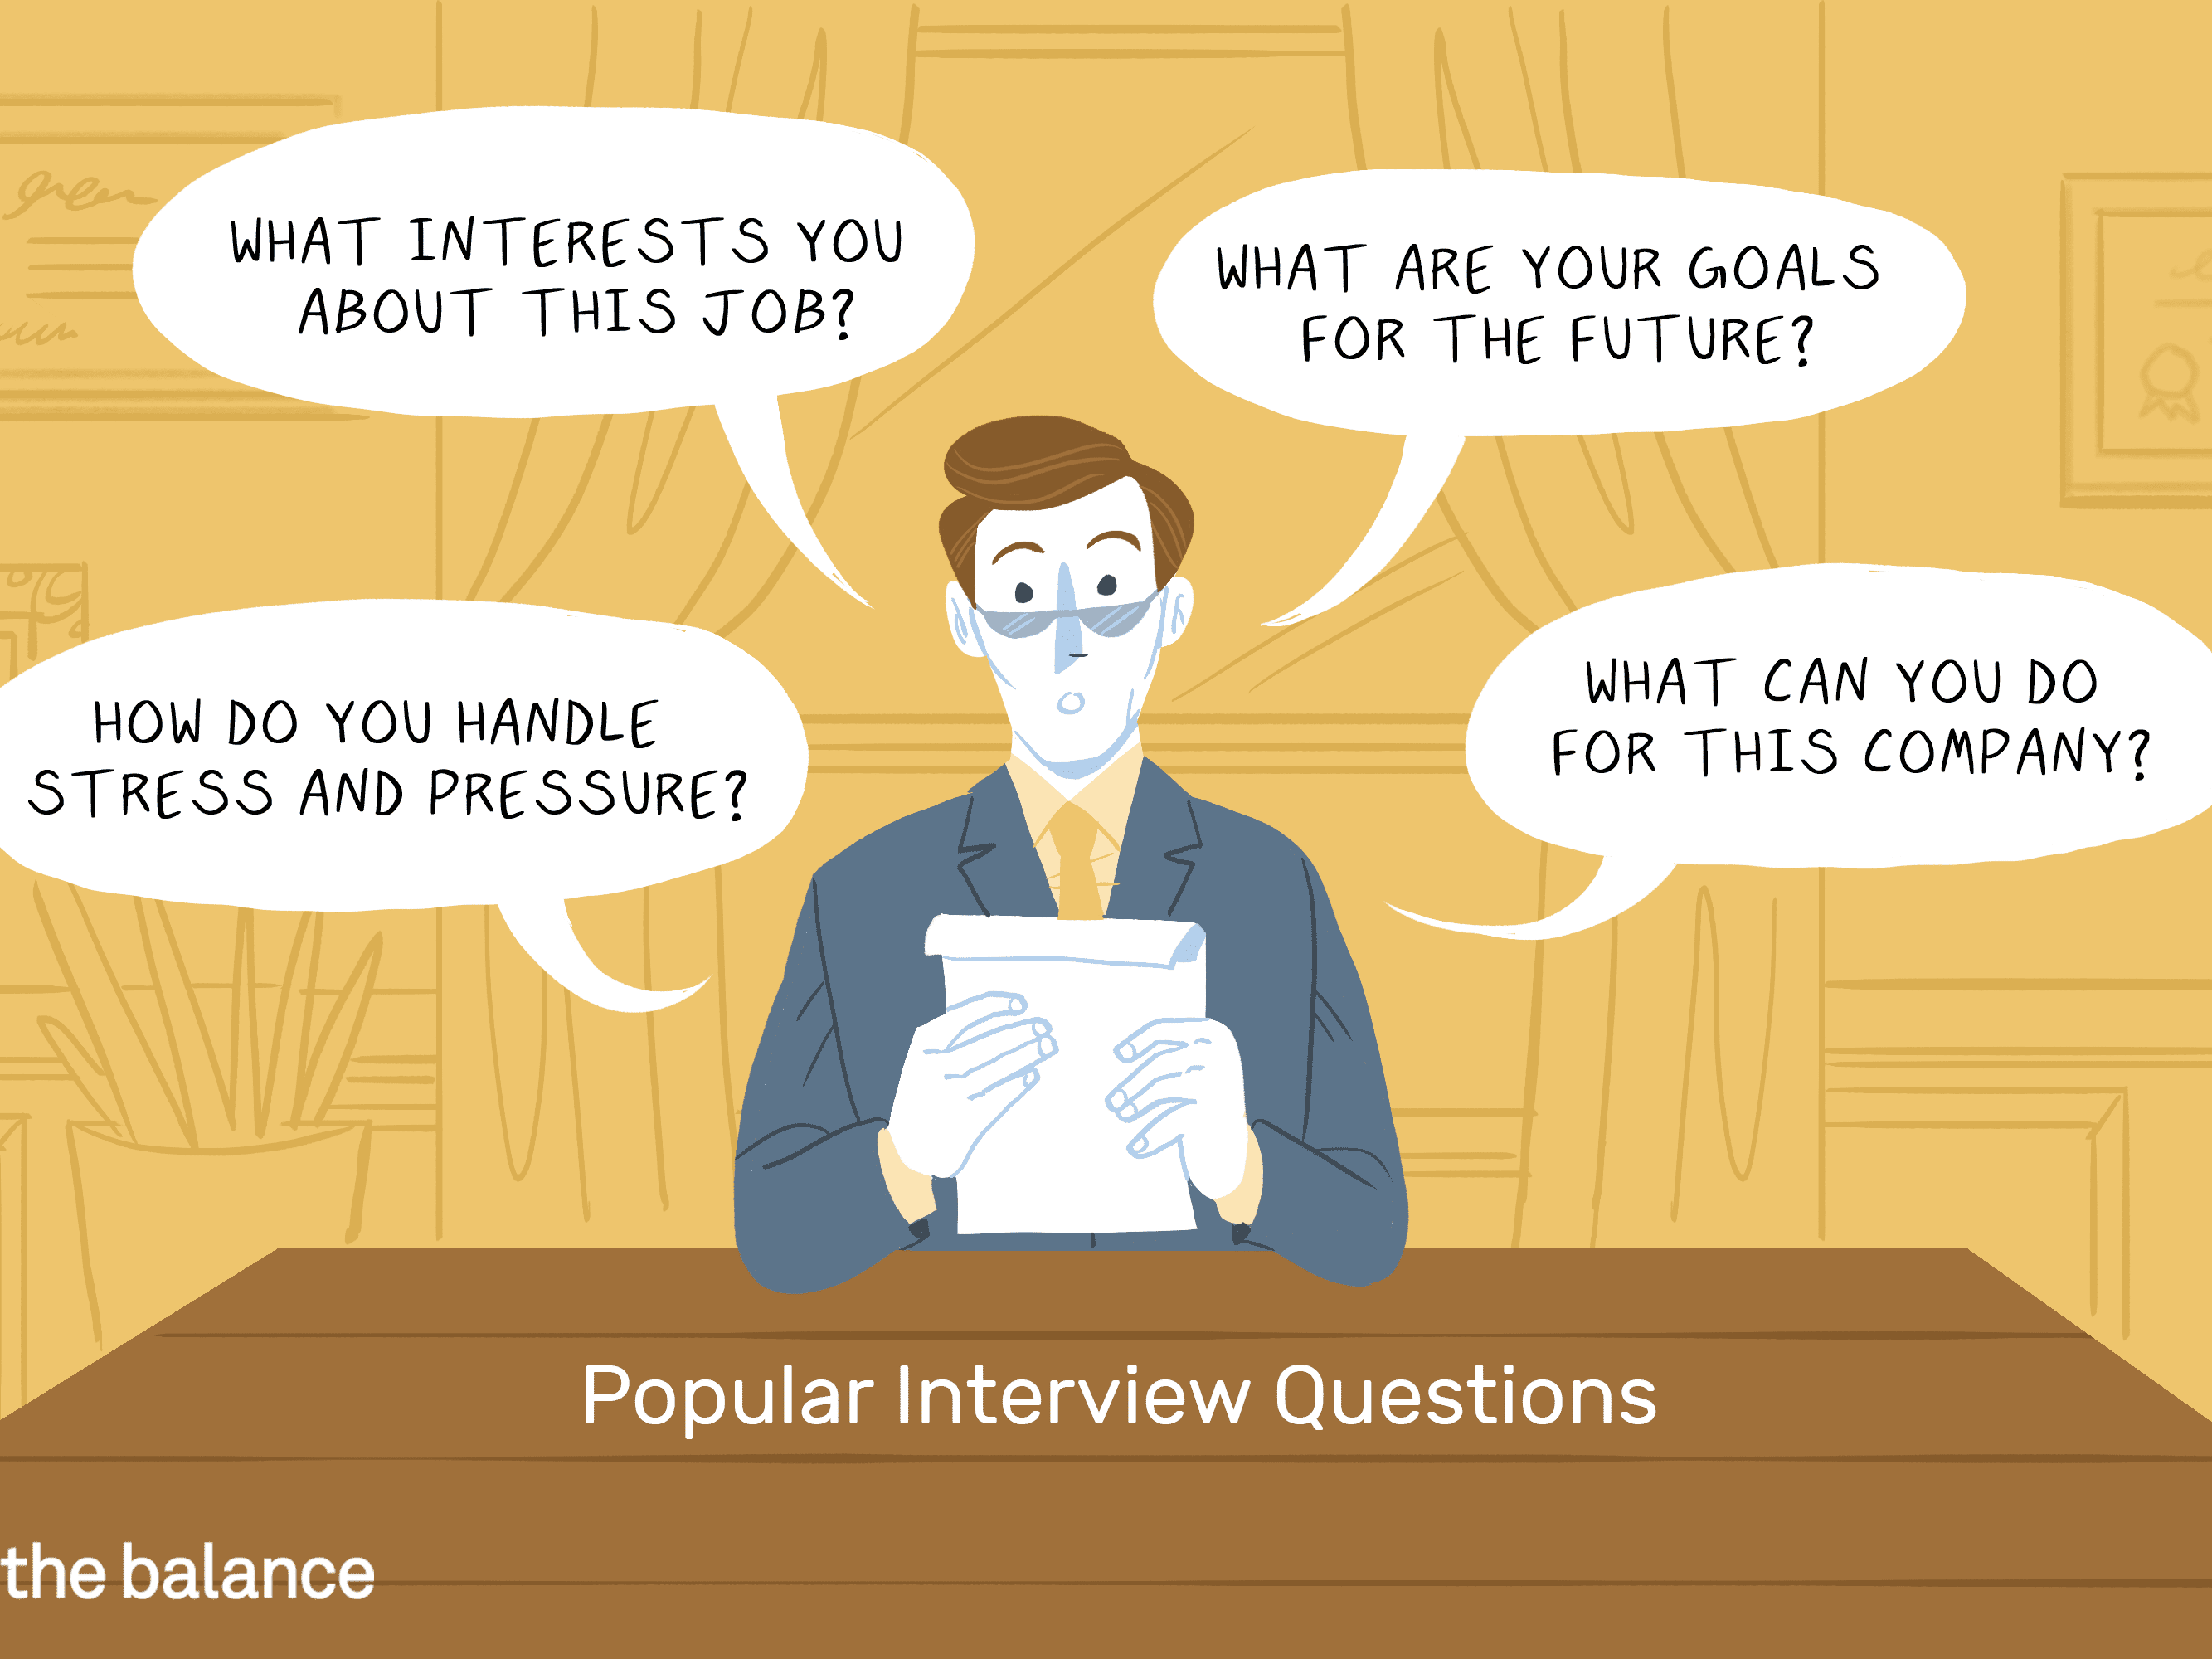 Common Screening Questions Asked at Job Interviews